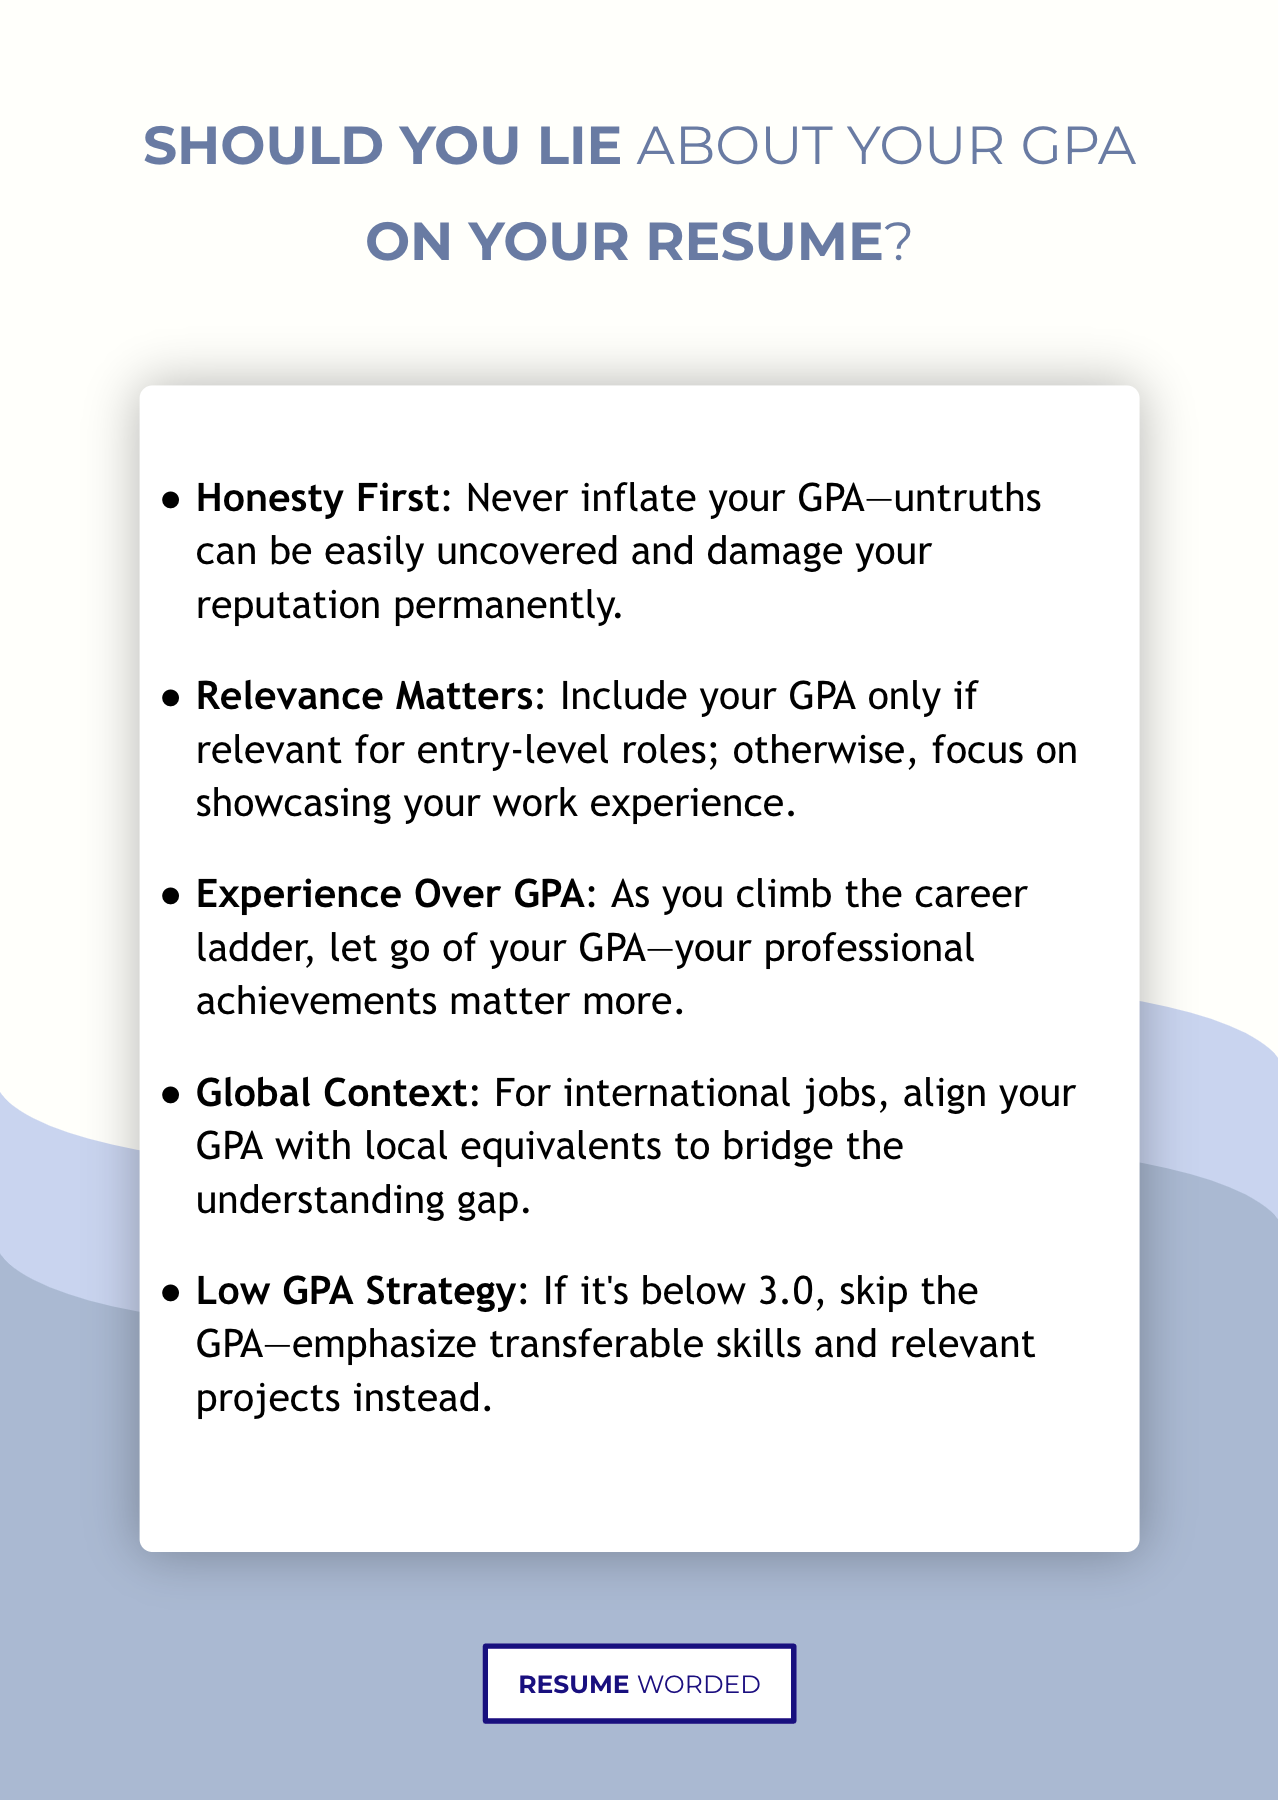 lie about gpa on resume